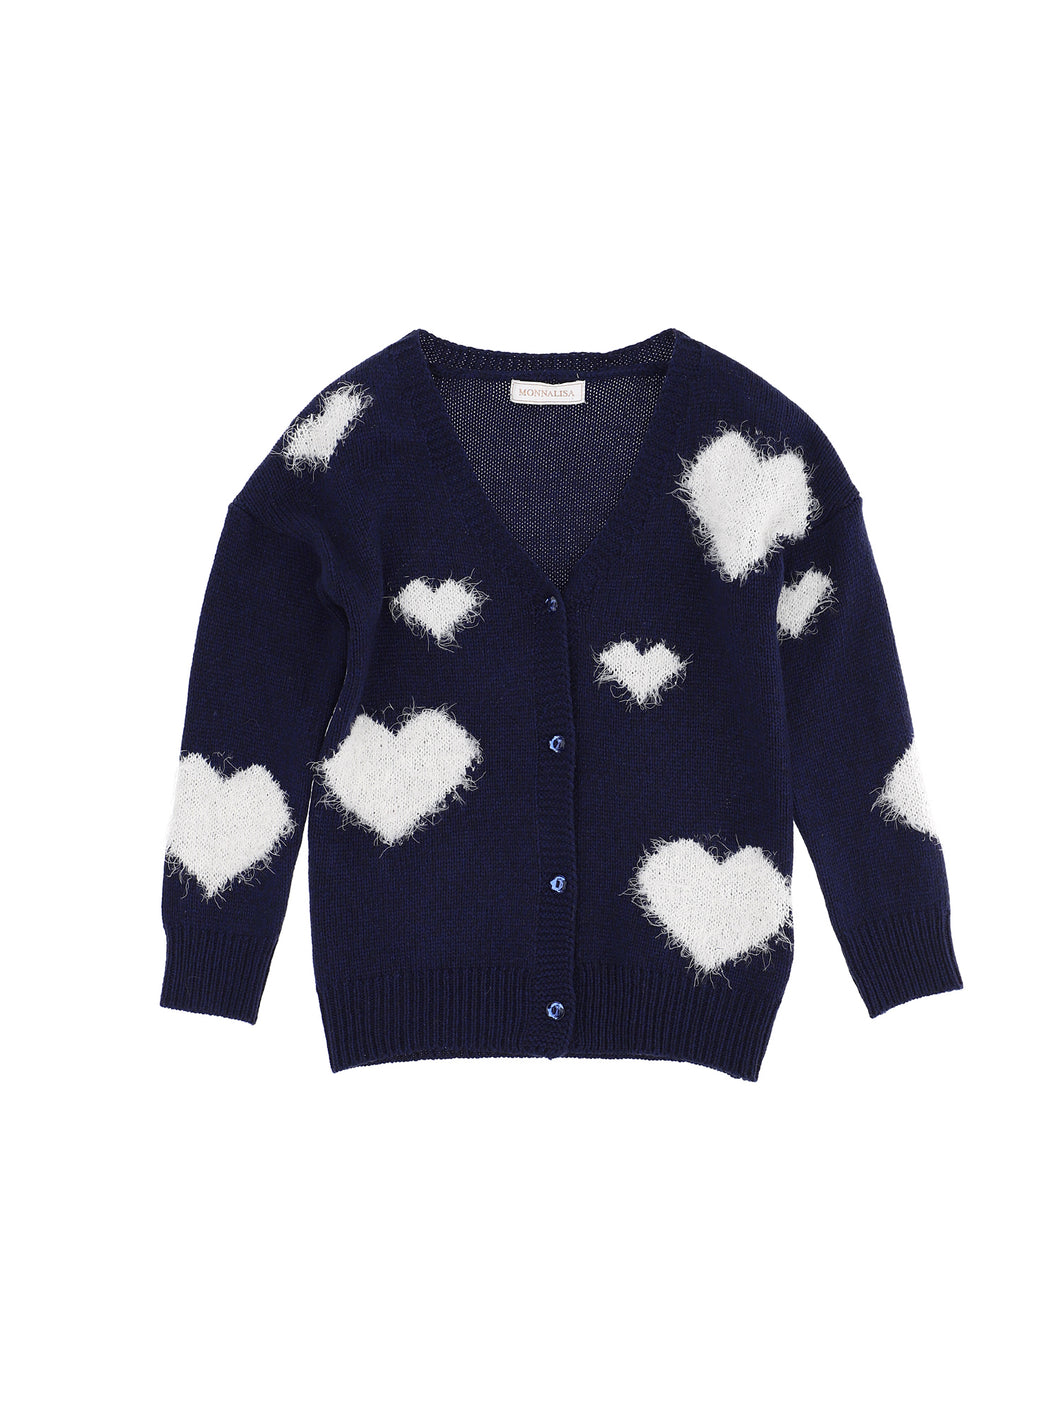 Knitted hearts cardigan